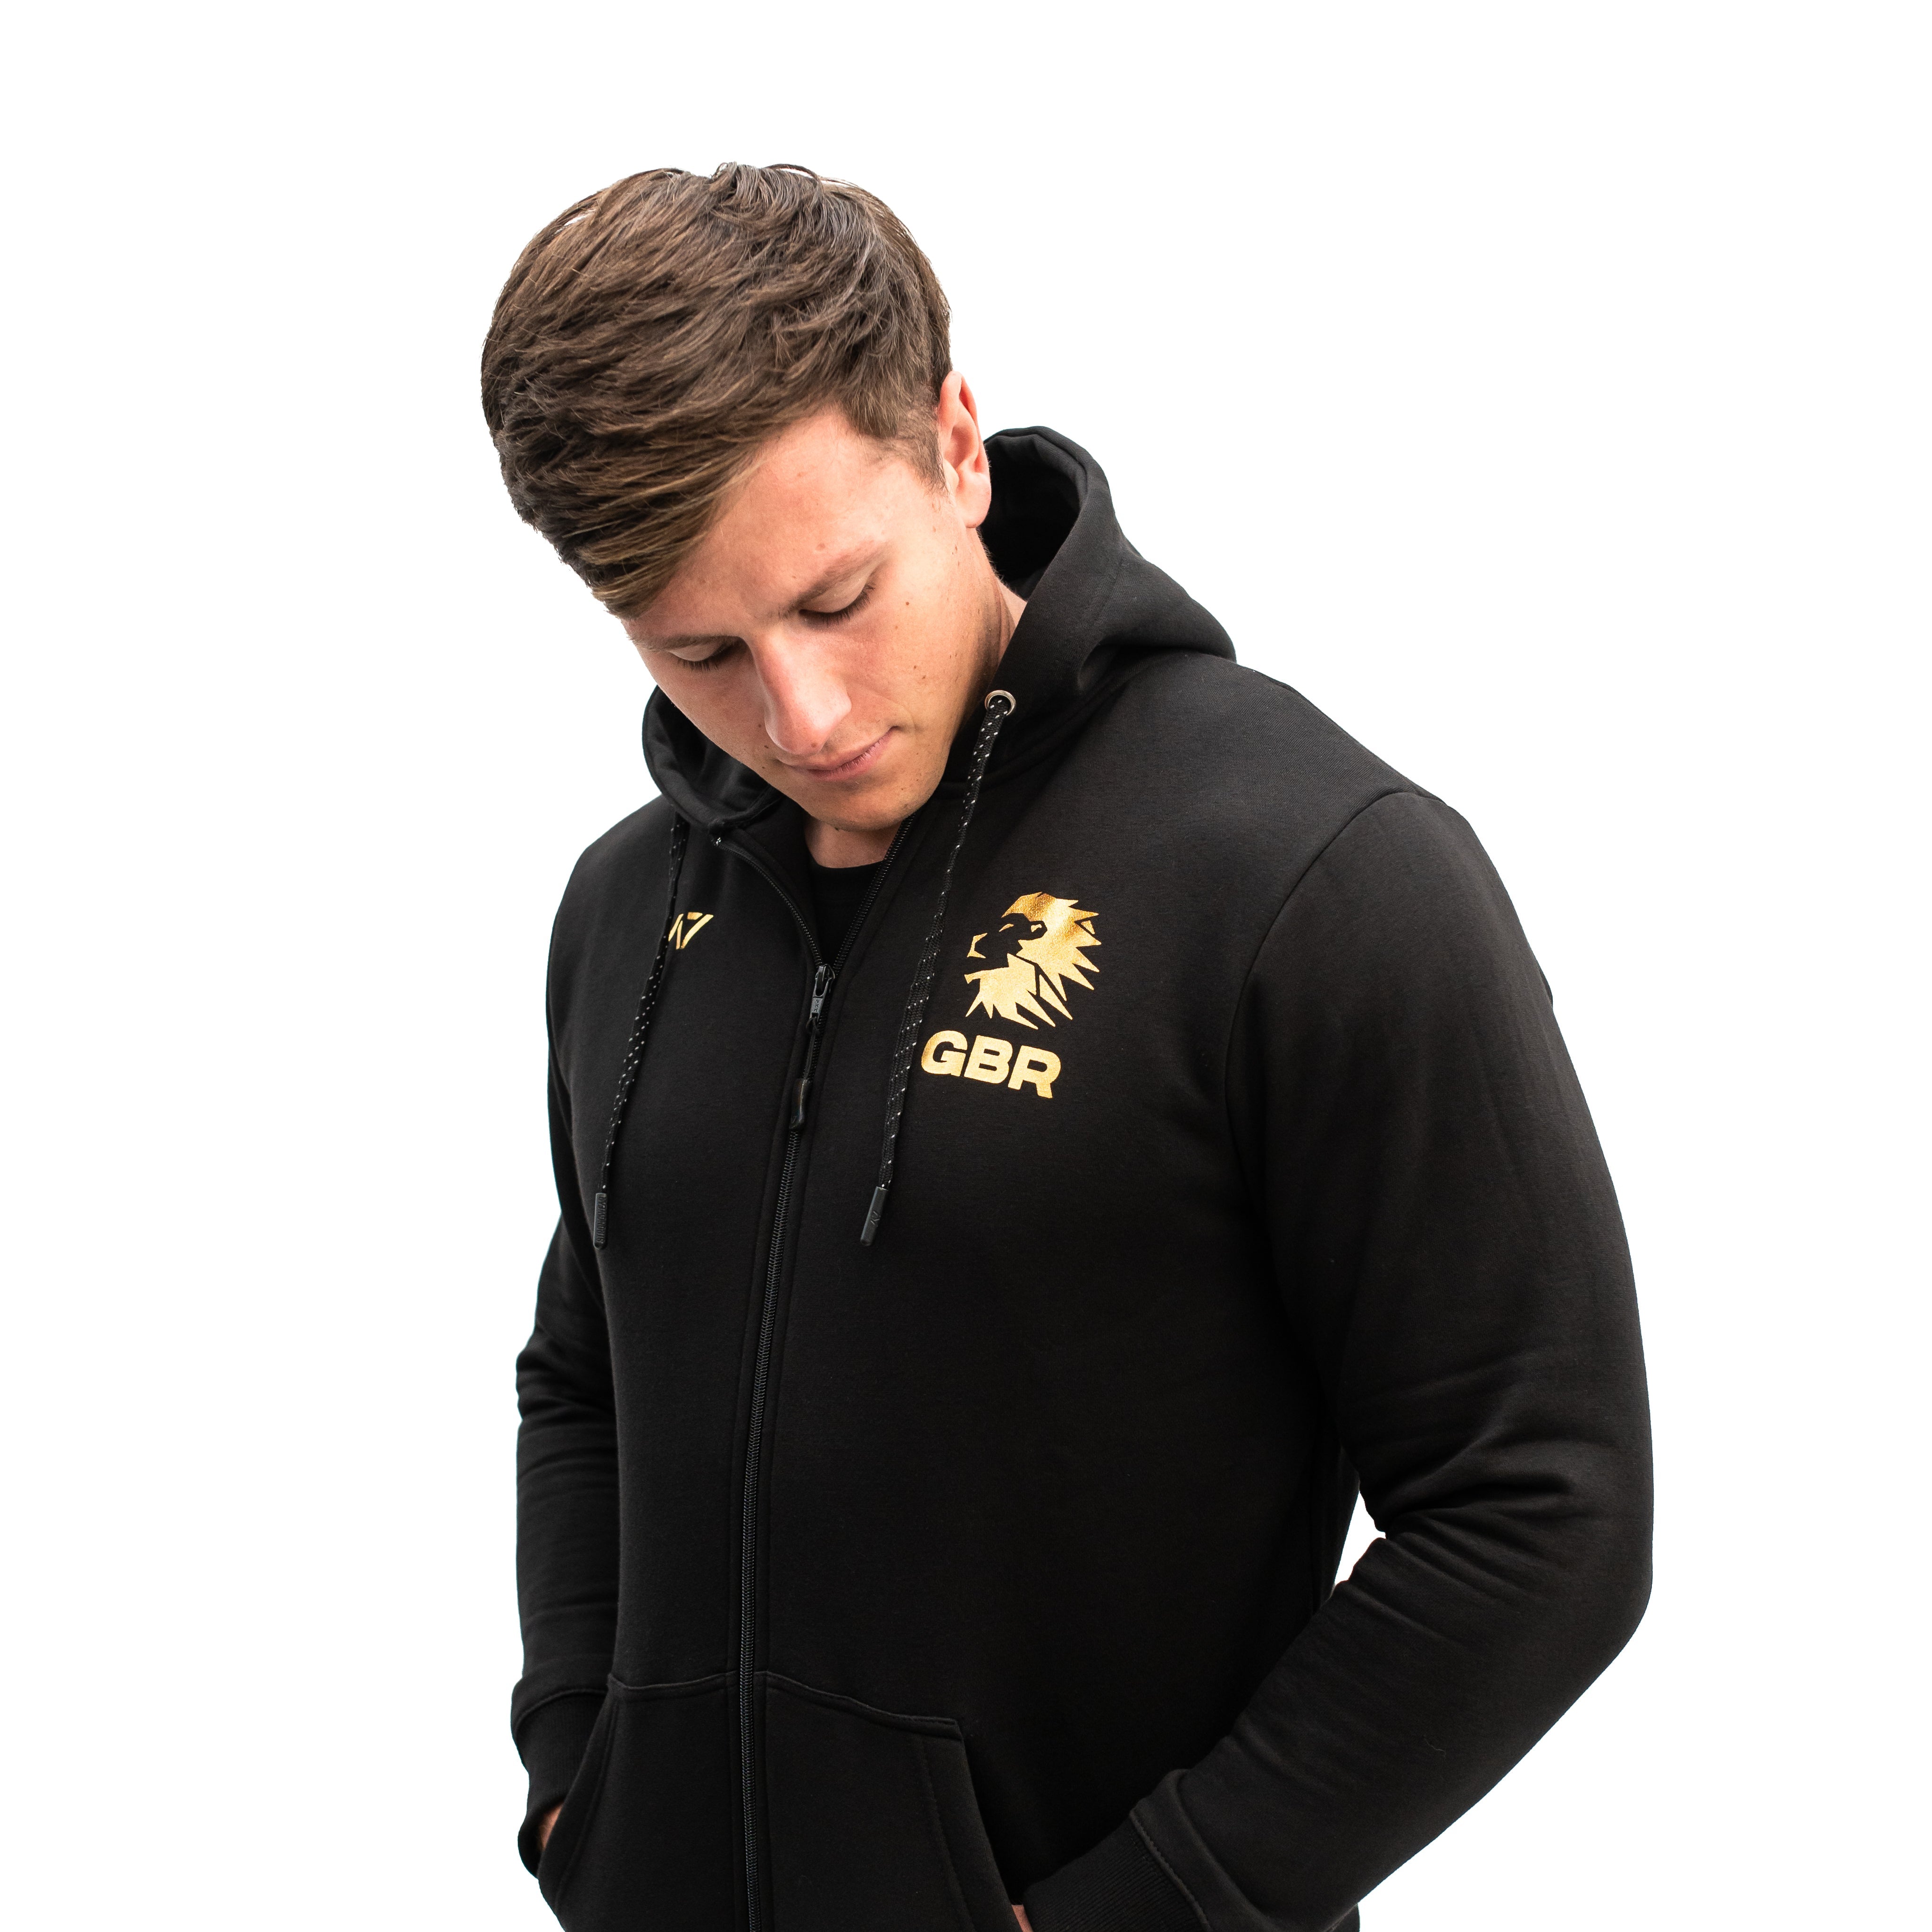 Purchase GB Gold Britannia zip up hoodie in UK and Europe from A7 UK. A7 have the best Bar Grip Tshirts, shipping to UK and Europe from A7 UK. Go Far is our newest design on our zip up hoodie. Demand Greatness on the front with an eagle on the back, in a chromium colourway! A7UK supplies the best Powerlifting apparel for all your workouts. Available in UK and Europe including France, Italy, Germany, the Netherlands, Sweden and Poland.